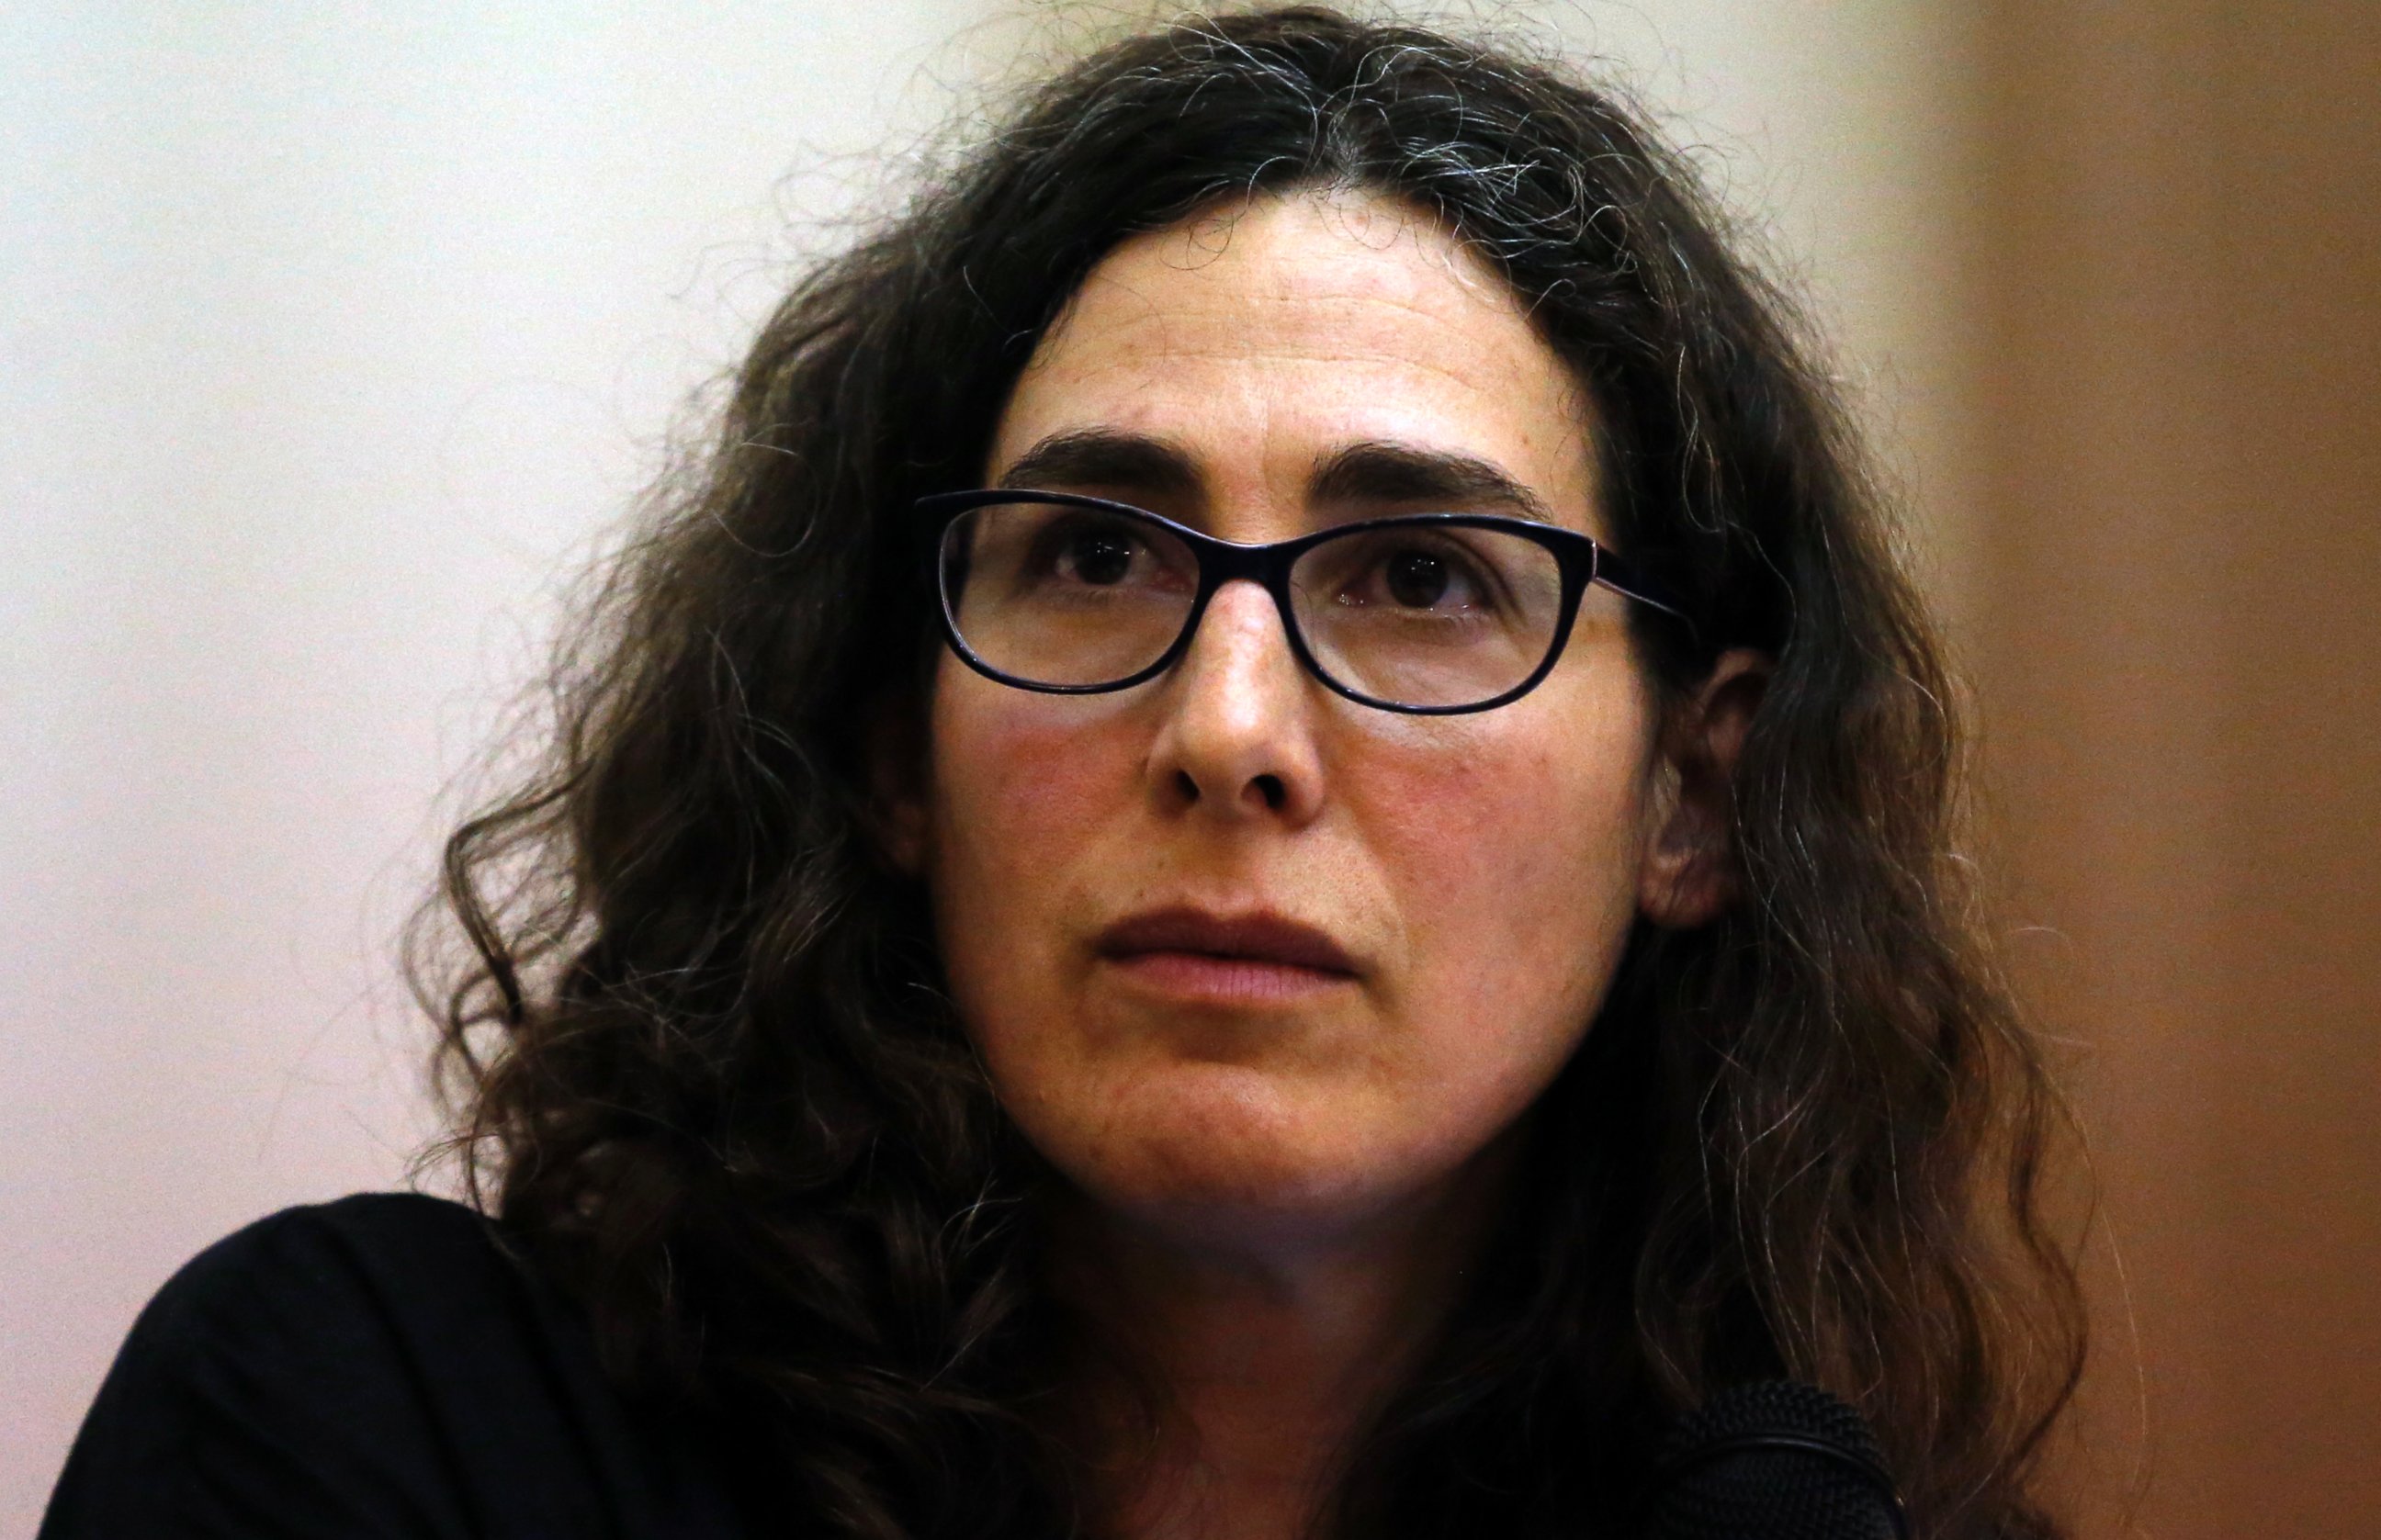 PHOTO:In this file photo, Sarah Koenig, producer and host of the podcast Serial speaks at Boston University's 'Power of Narrative' conference in Boston, March 29, 2015. 